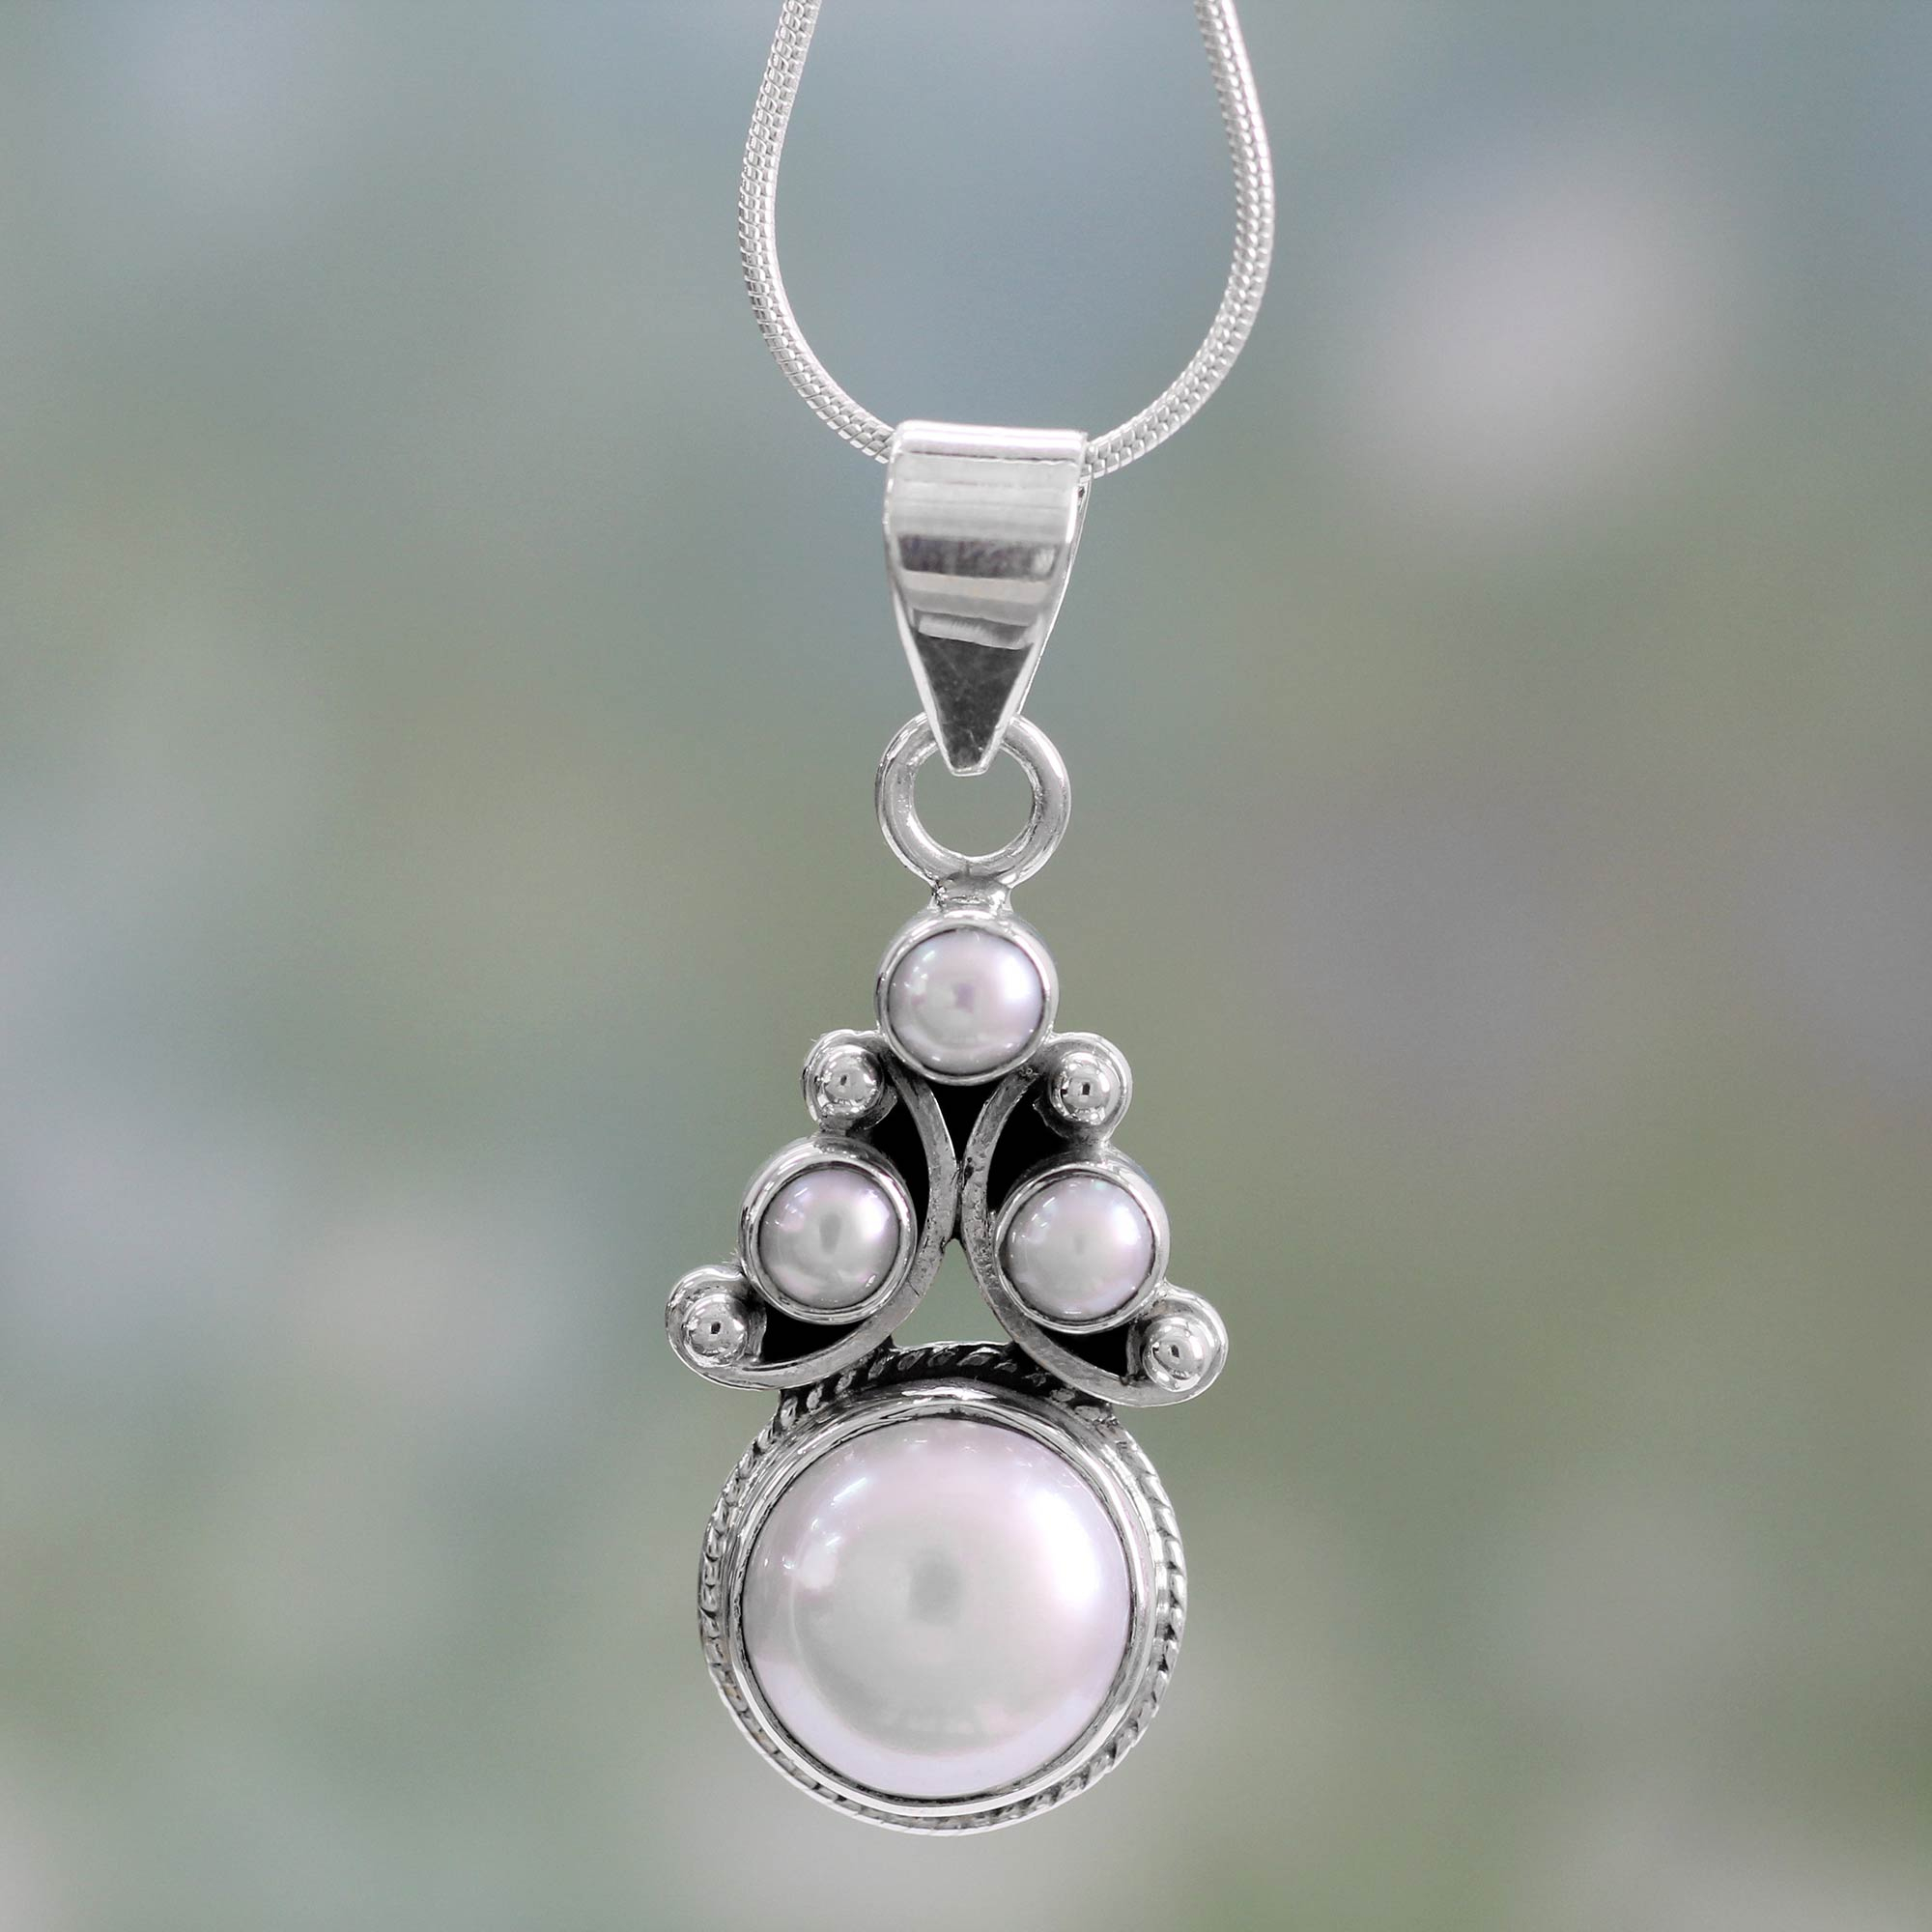 Bridal Pearl Necklace in Sterling Silver from India, 'Angel Tree' Handcrafted jewelry